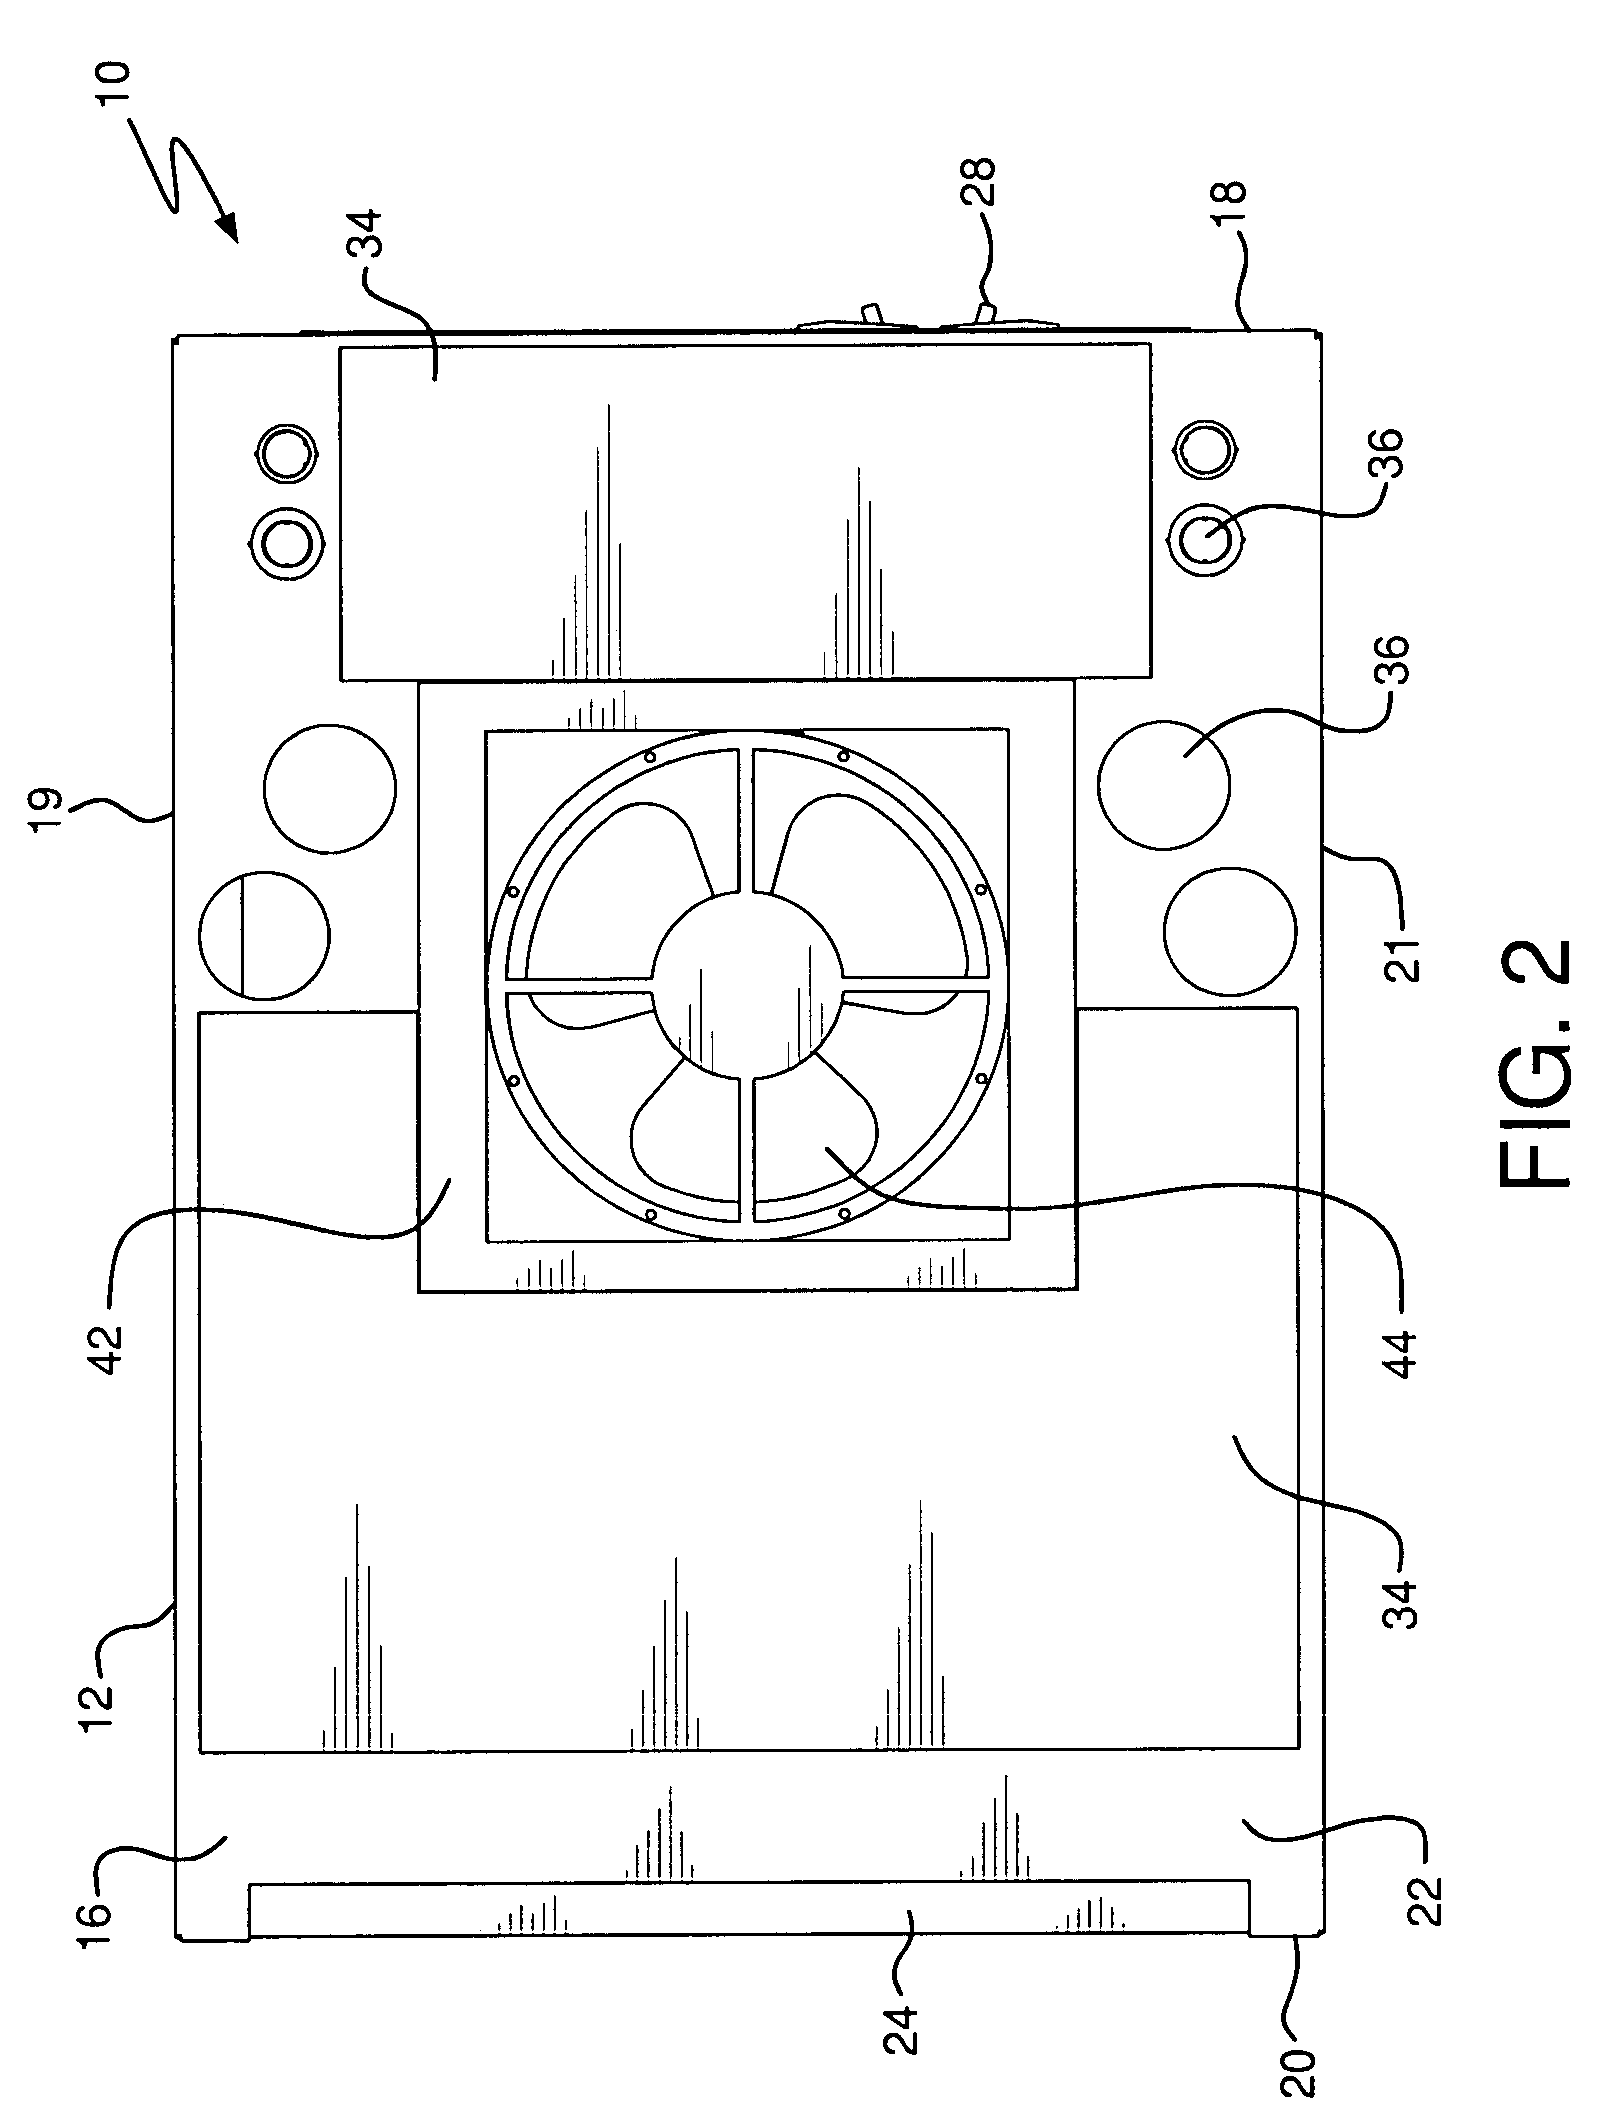 Wiring distribution device for an electronics rack